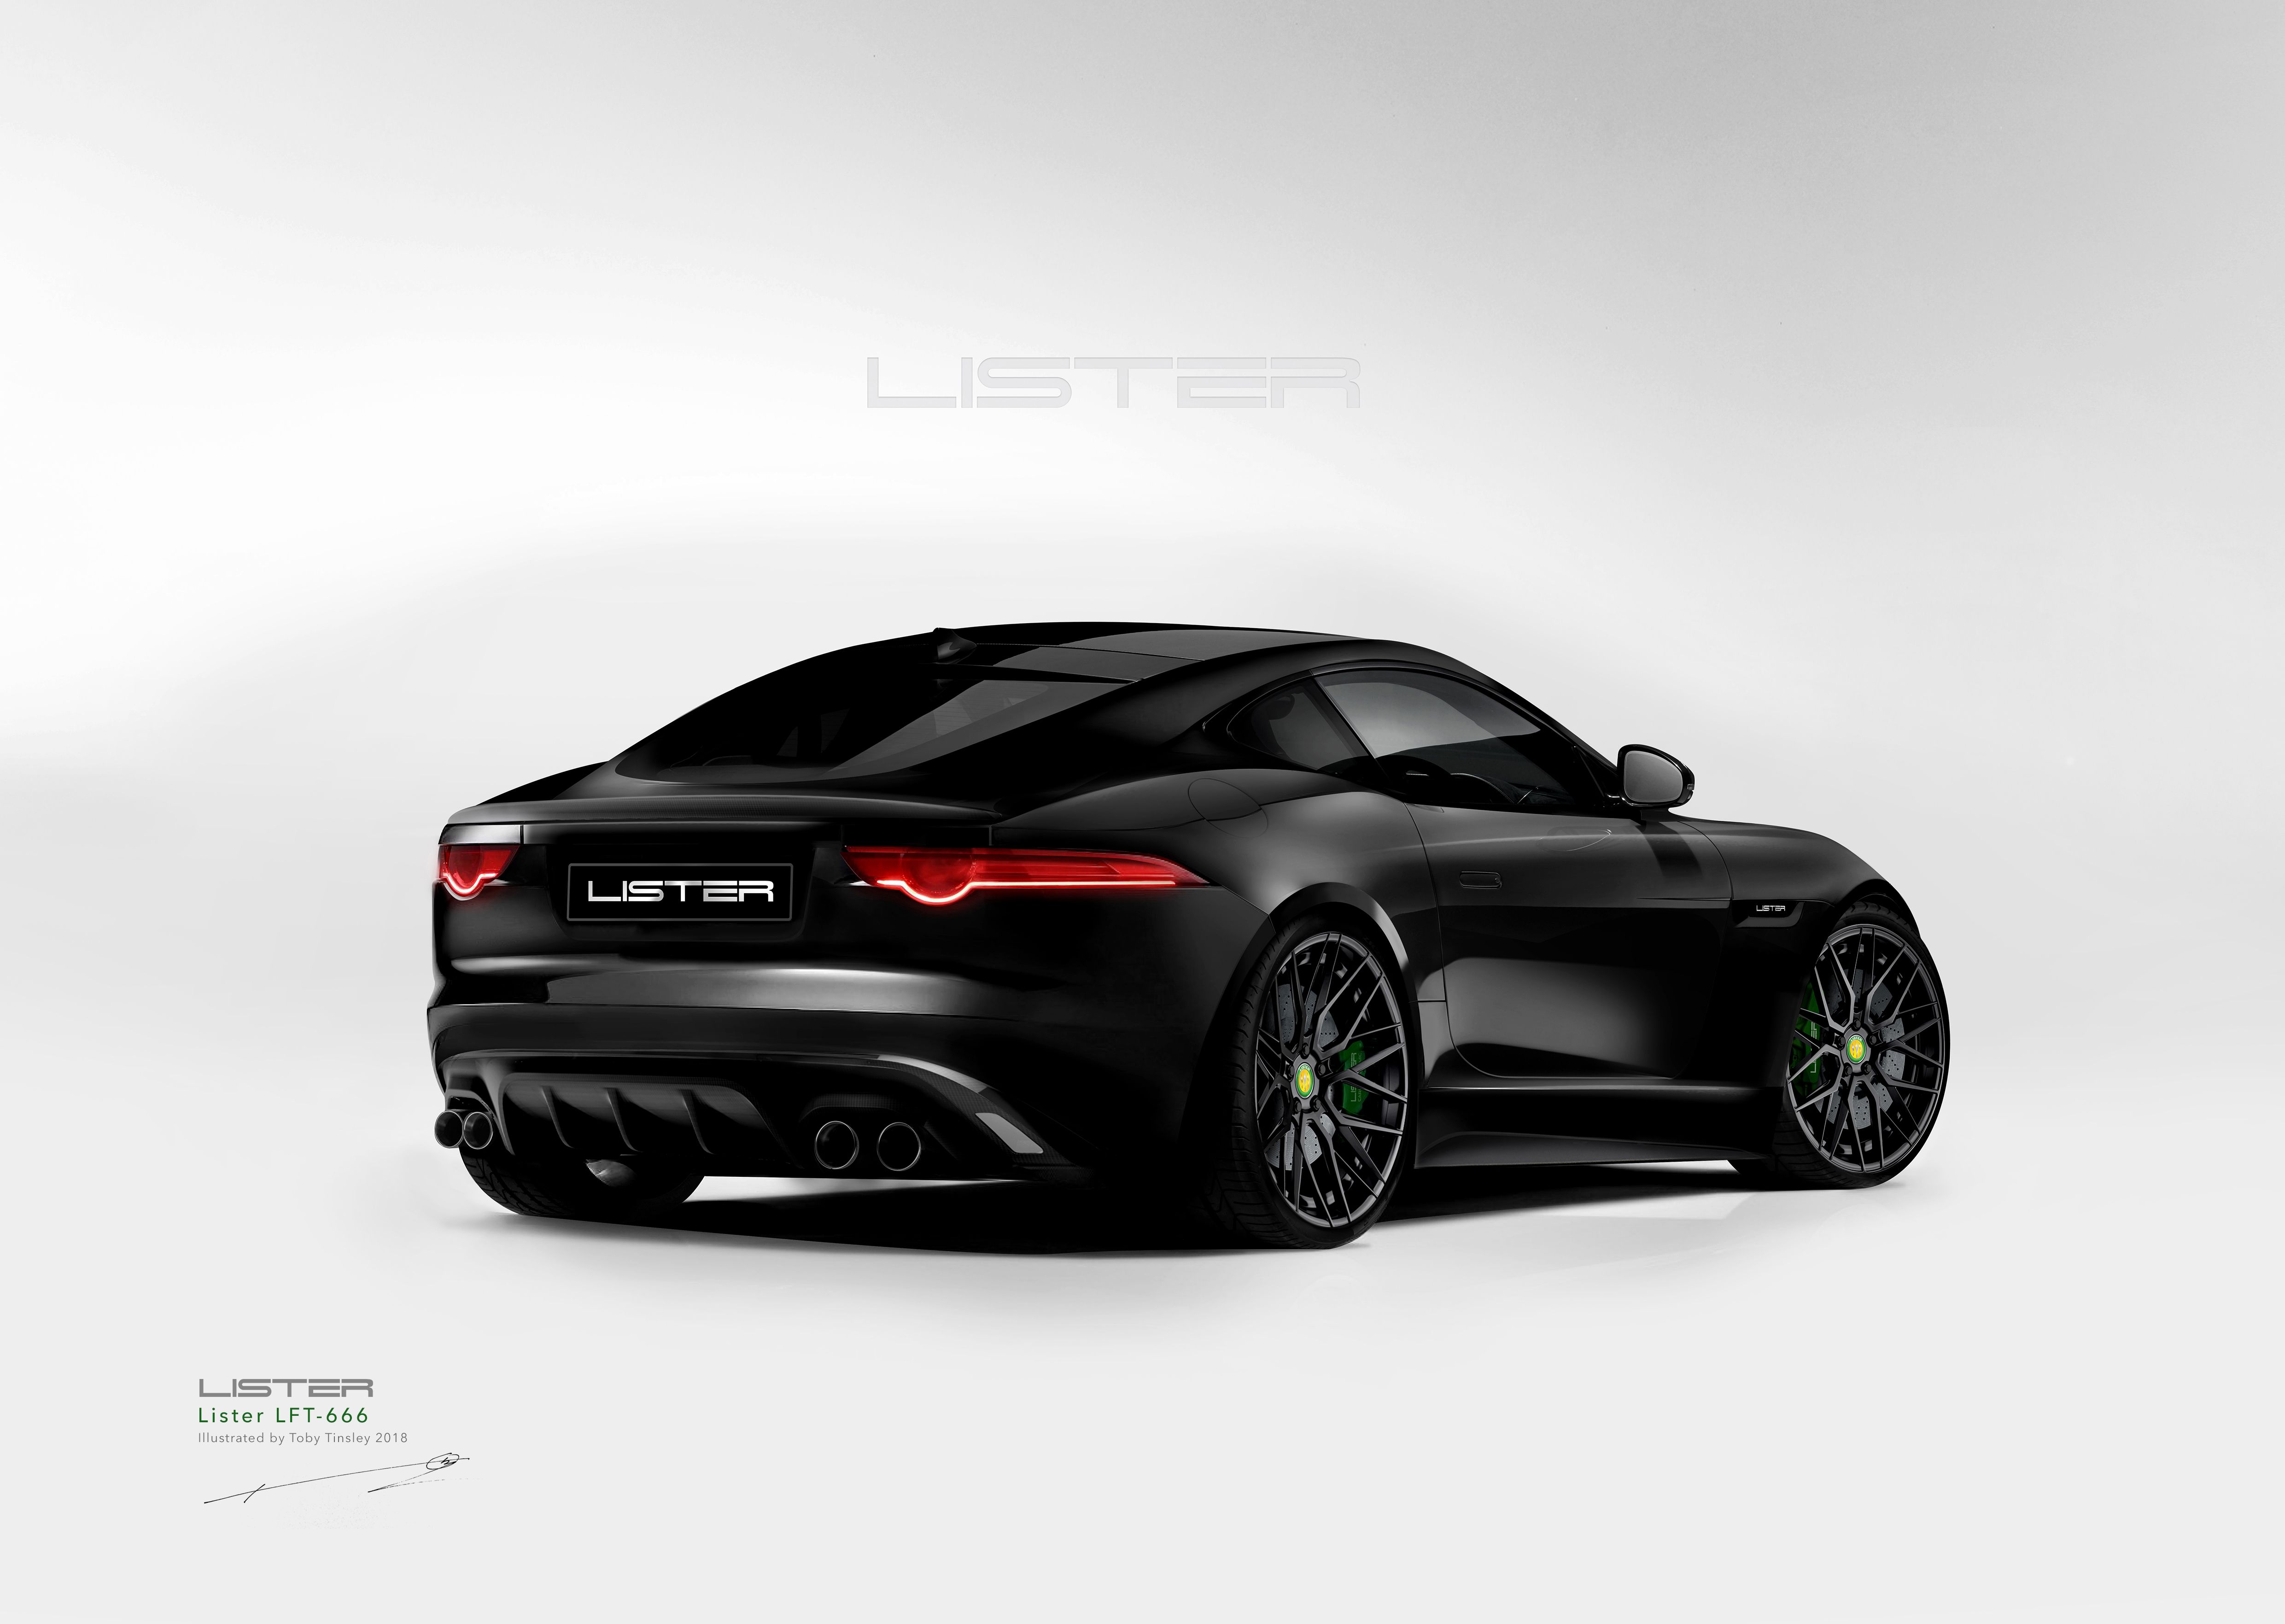 2018 The Lister Thunder Gets A Name Makeover, You Can Now Start Calling it The LFT-666